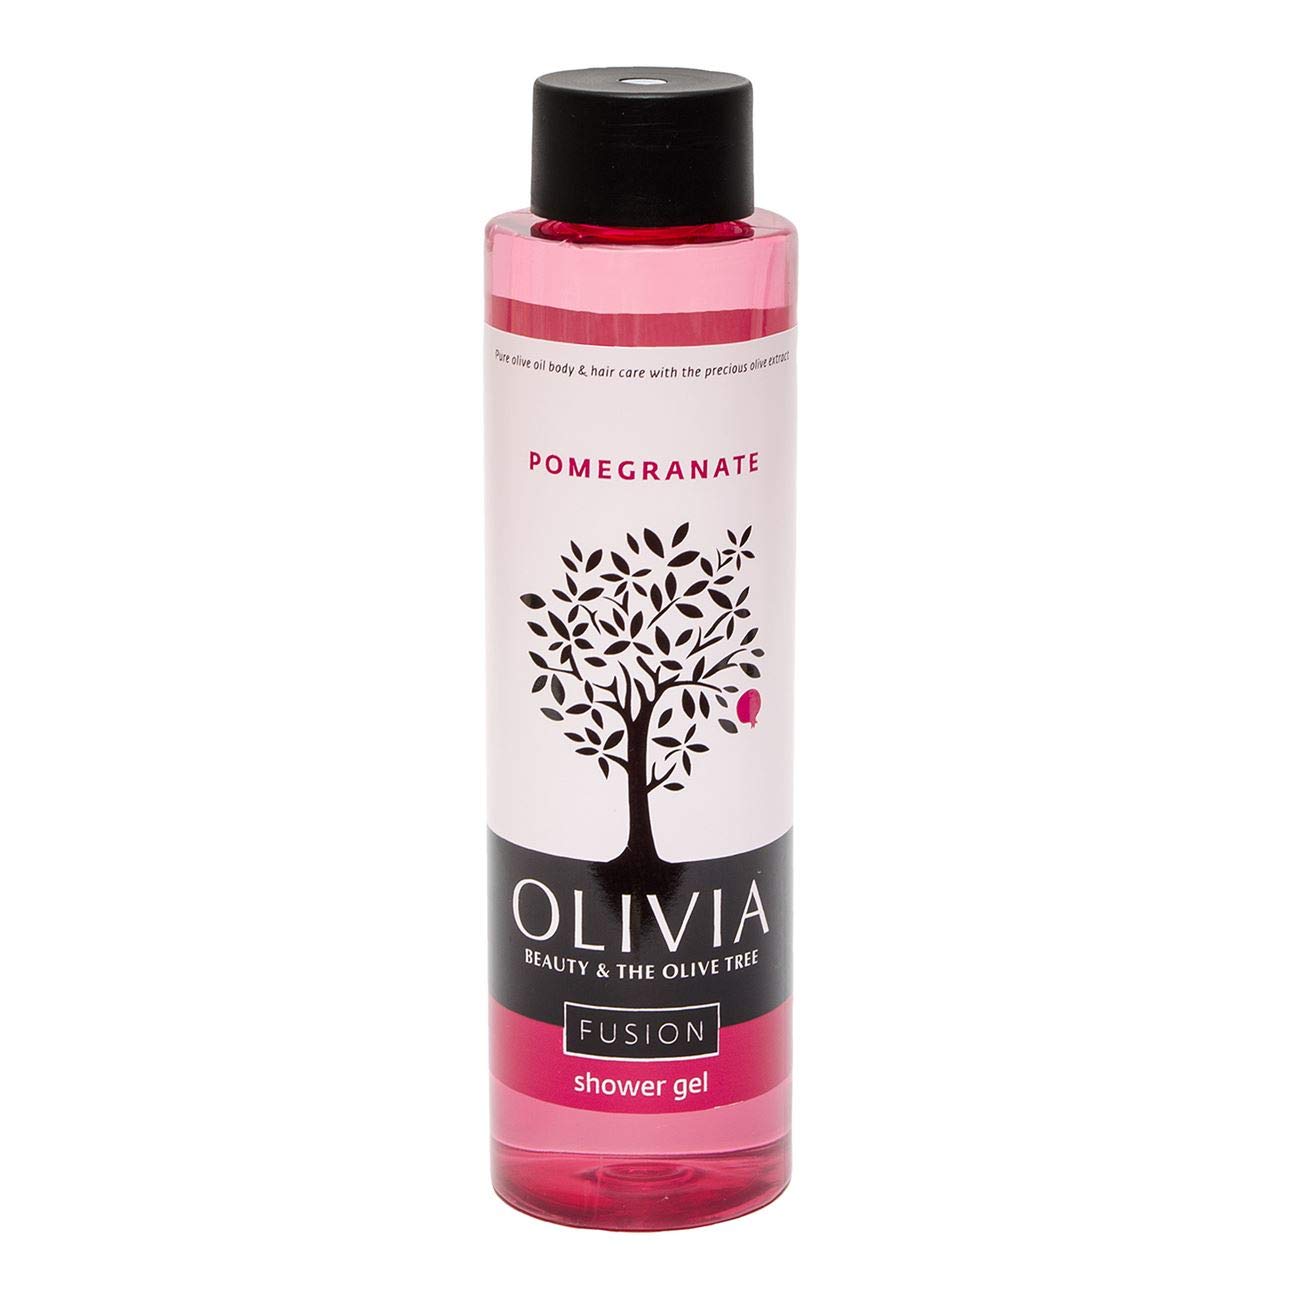 Olivia Olive Beauty Products :Refreshing Shower Gel with Organic Olive Fruit & Pomegranate extracts, from Greece, 10.1 oz.